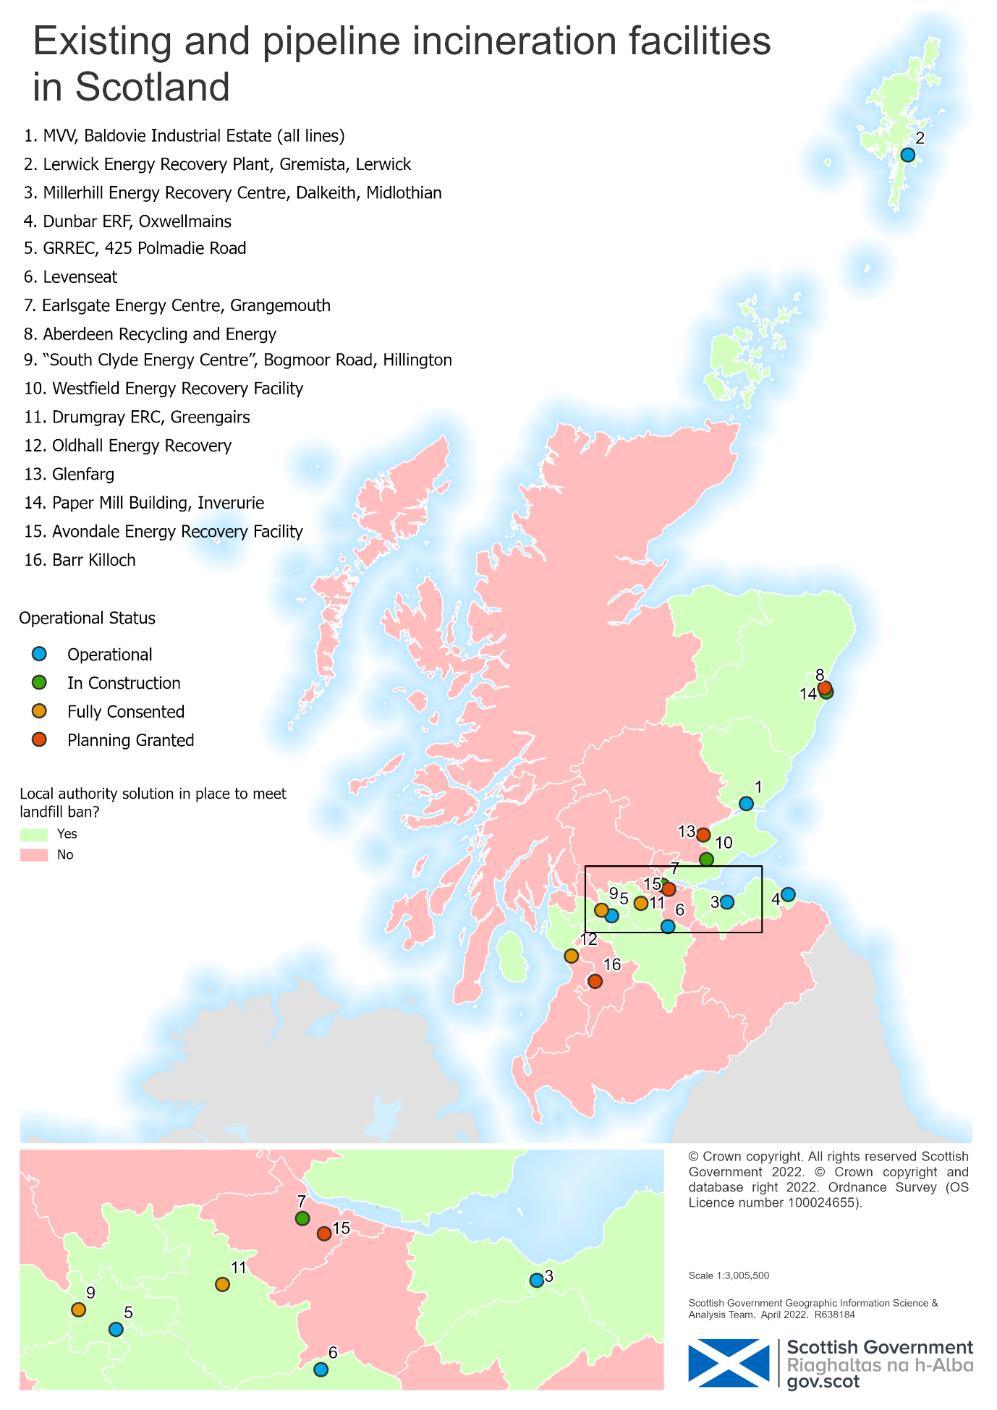 Existing and pipeline incineration facilities in Scotland